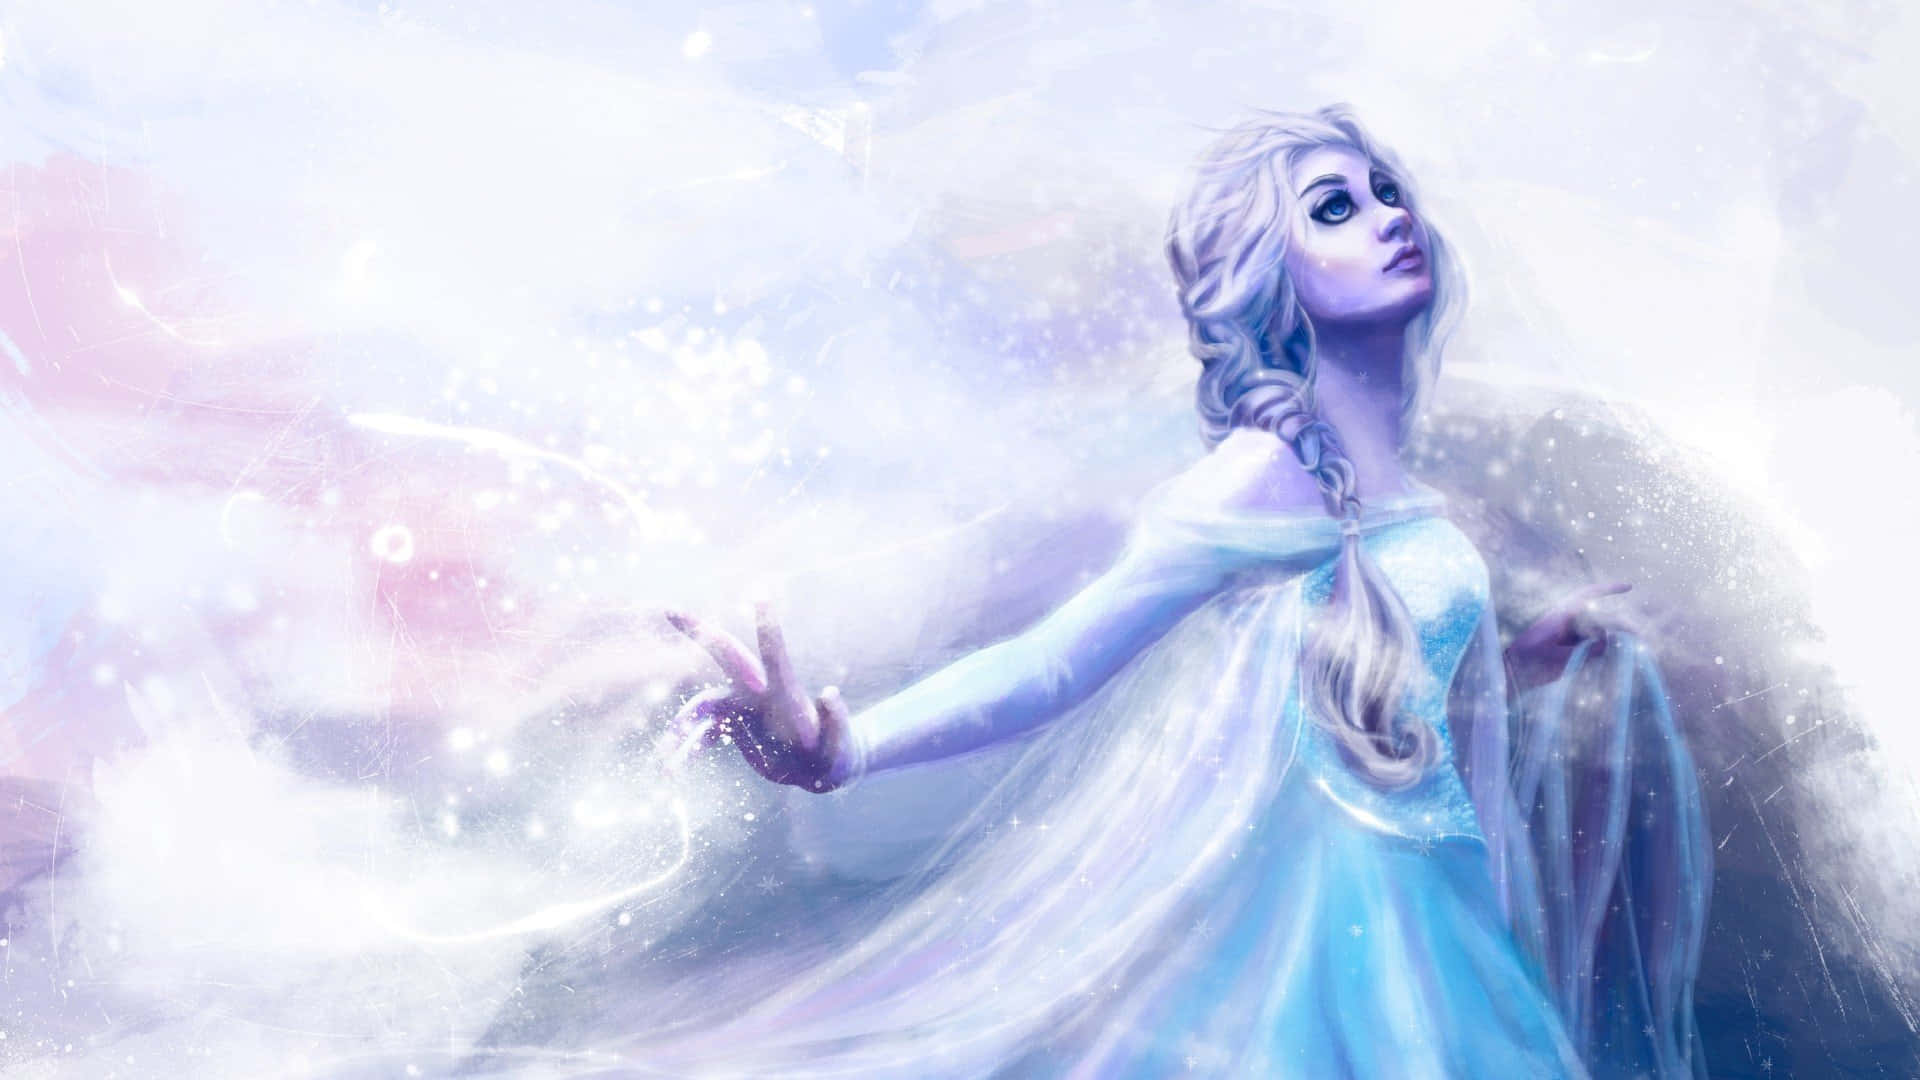 Elsa of Arendelle bringing in the magical snow